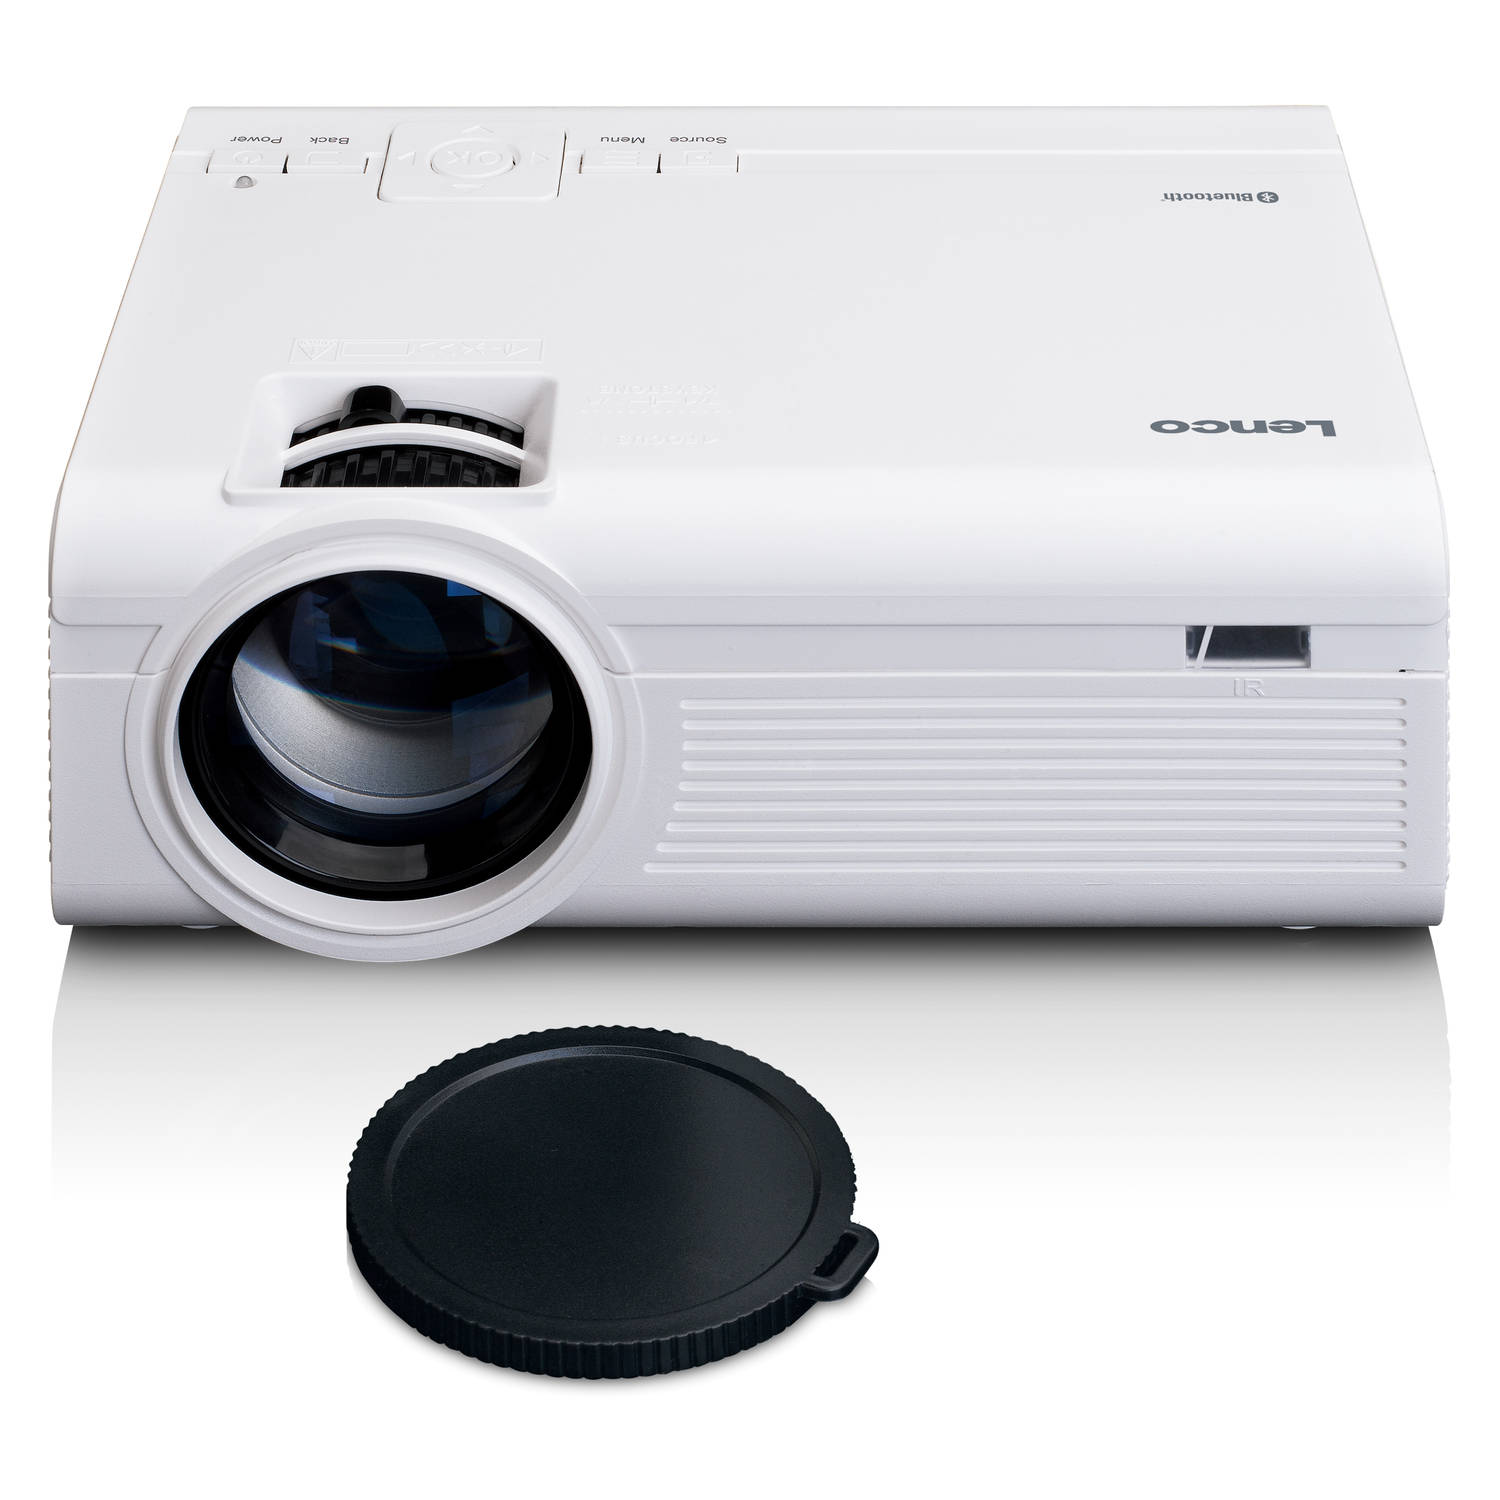 Lcd Projector Met Bluetooth Lenco Lpj-300wh Wit